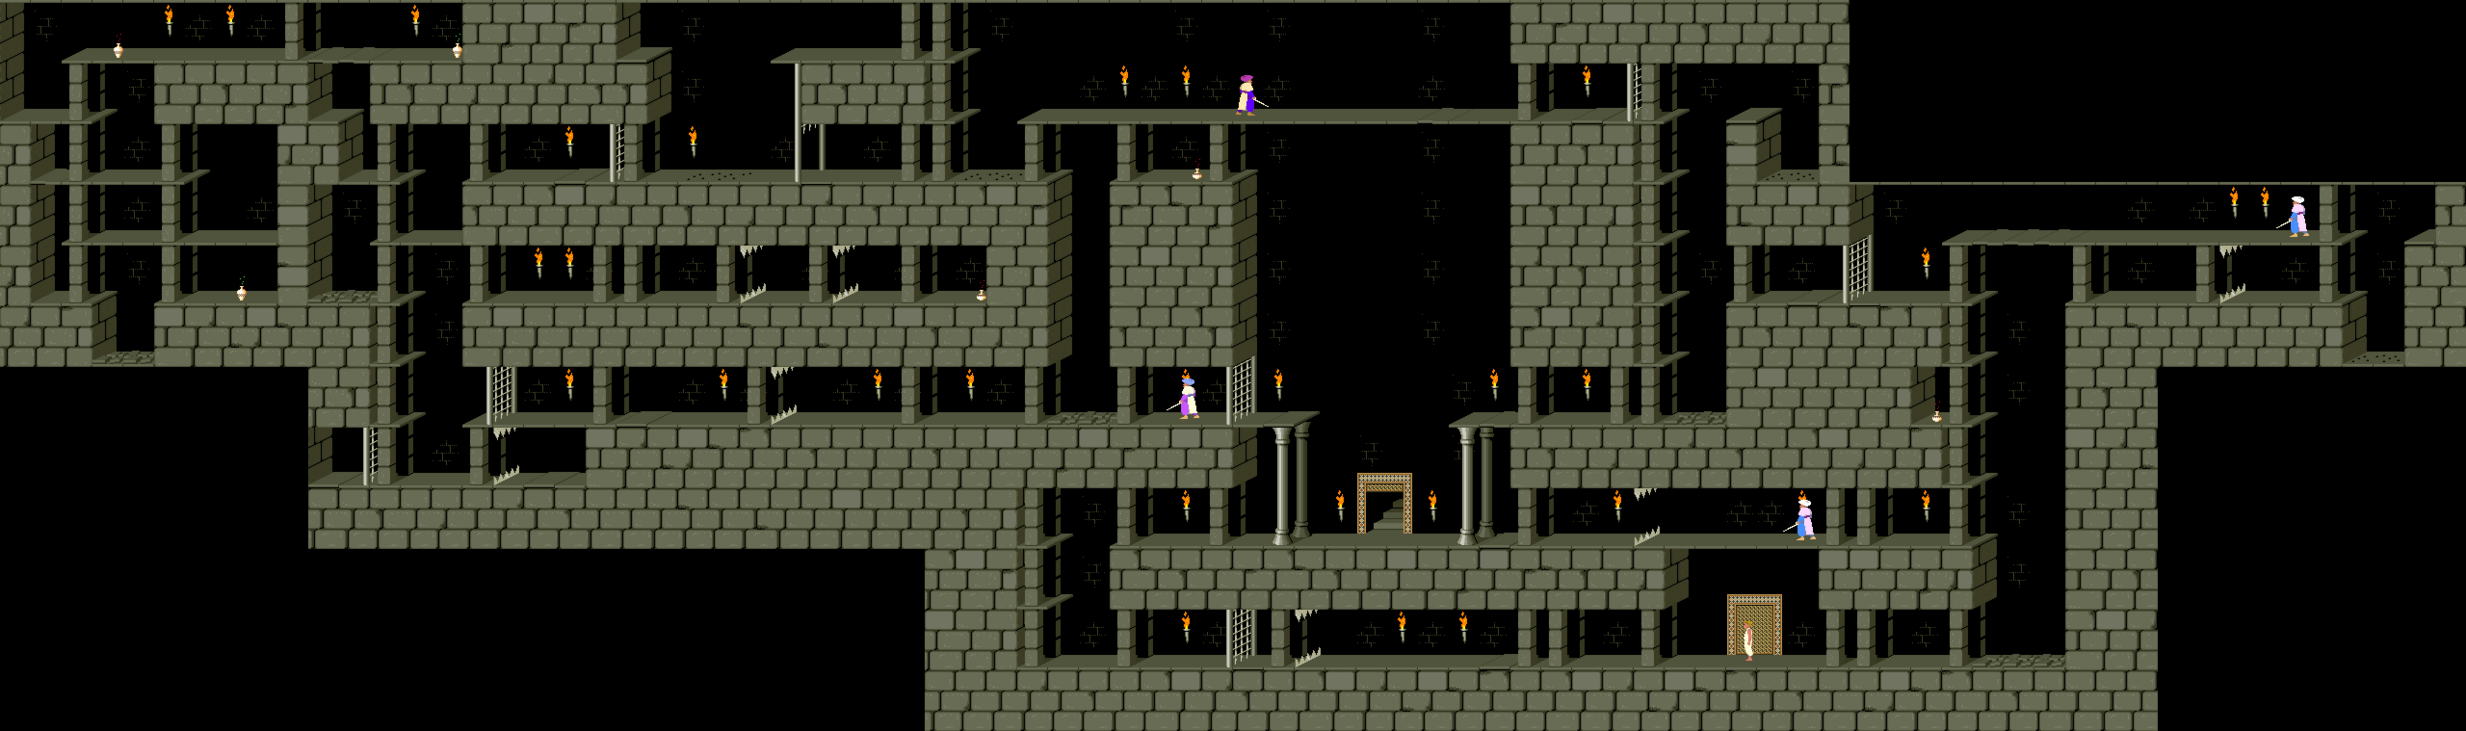 prince-of-persia-level-9-strategywiki-the-video-game-walkthrough-and-strategy-guide-wiki